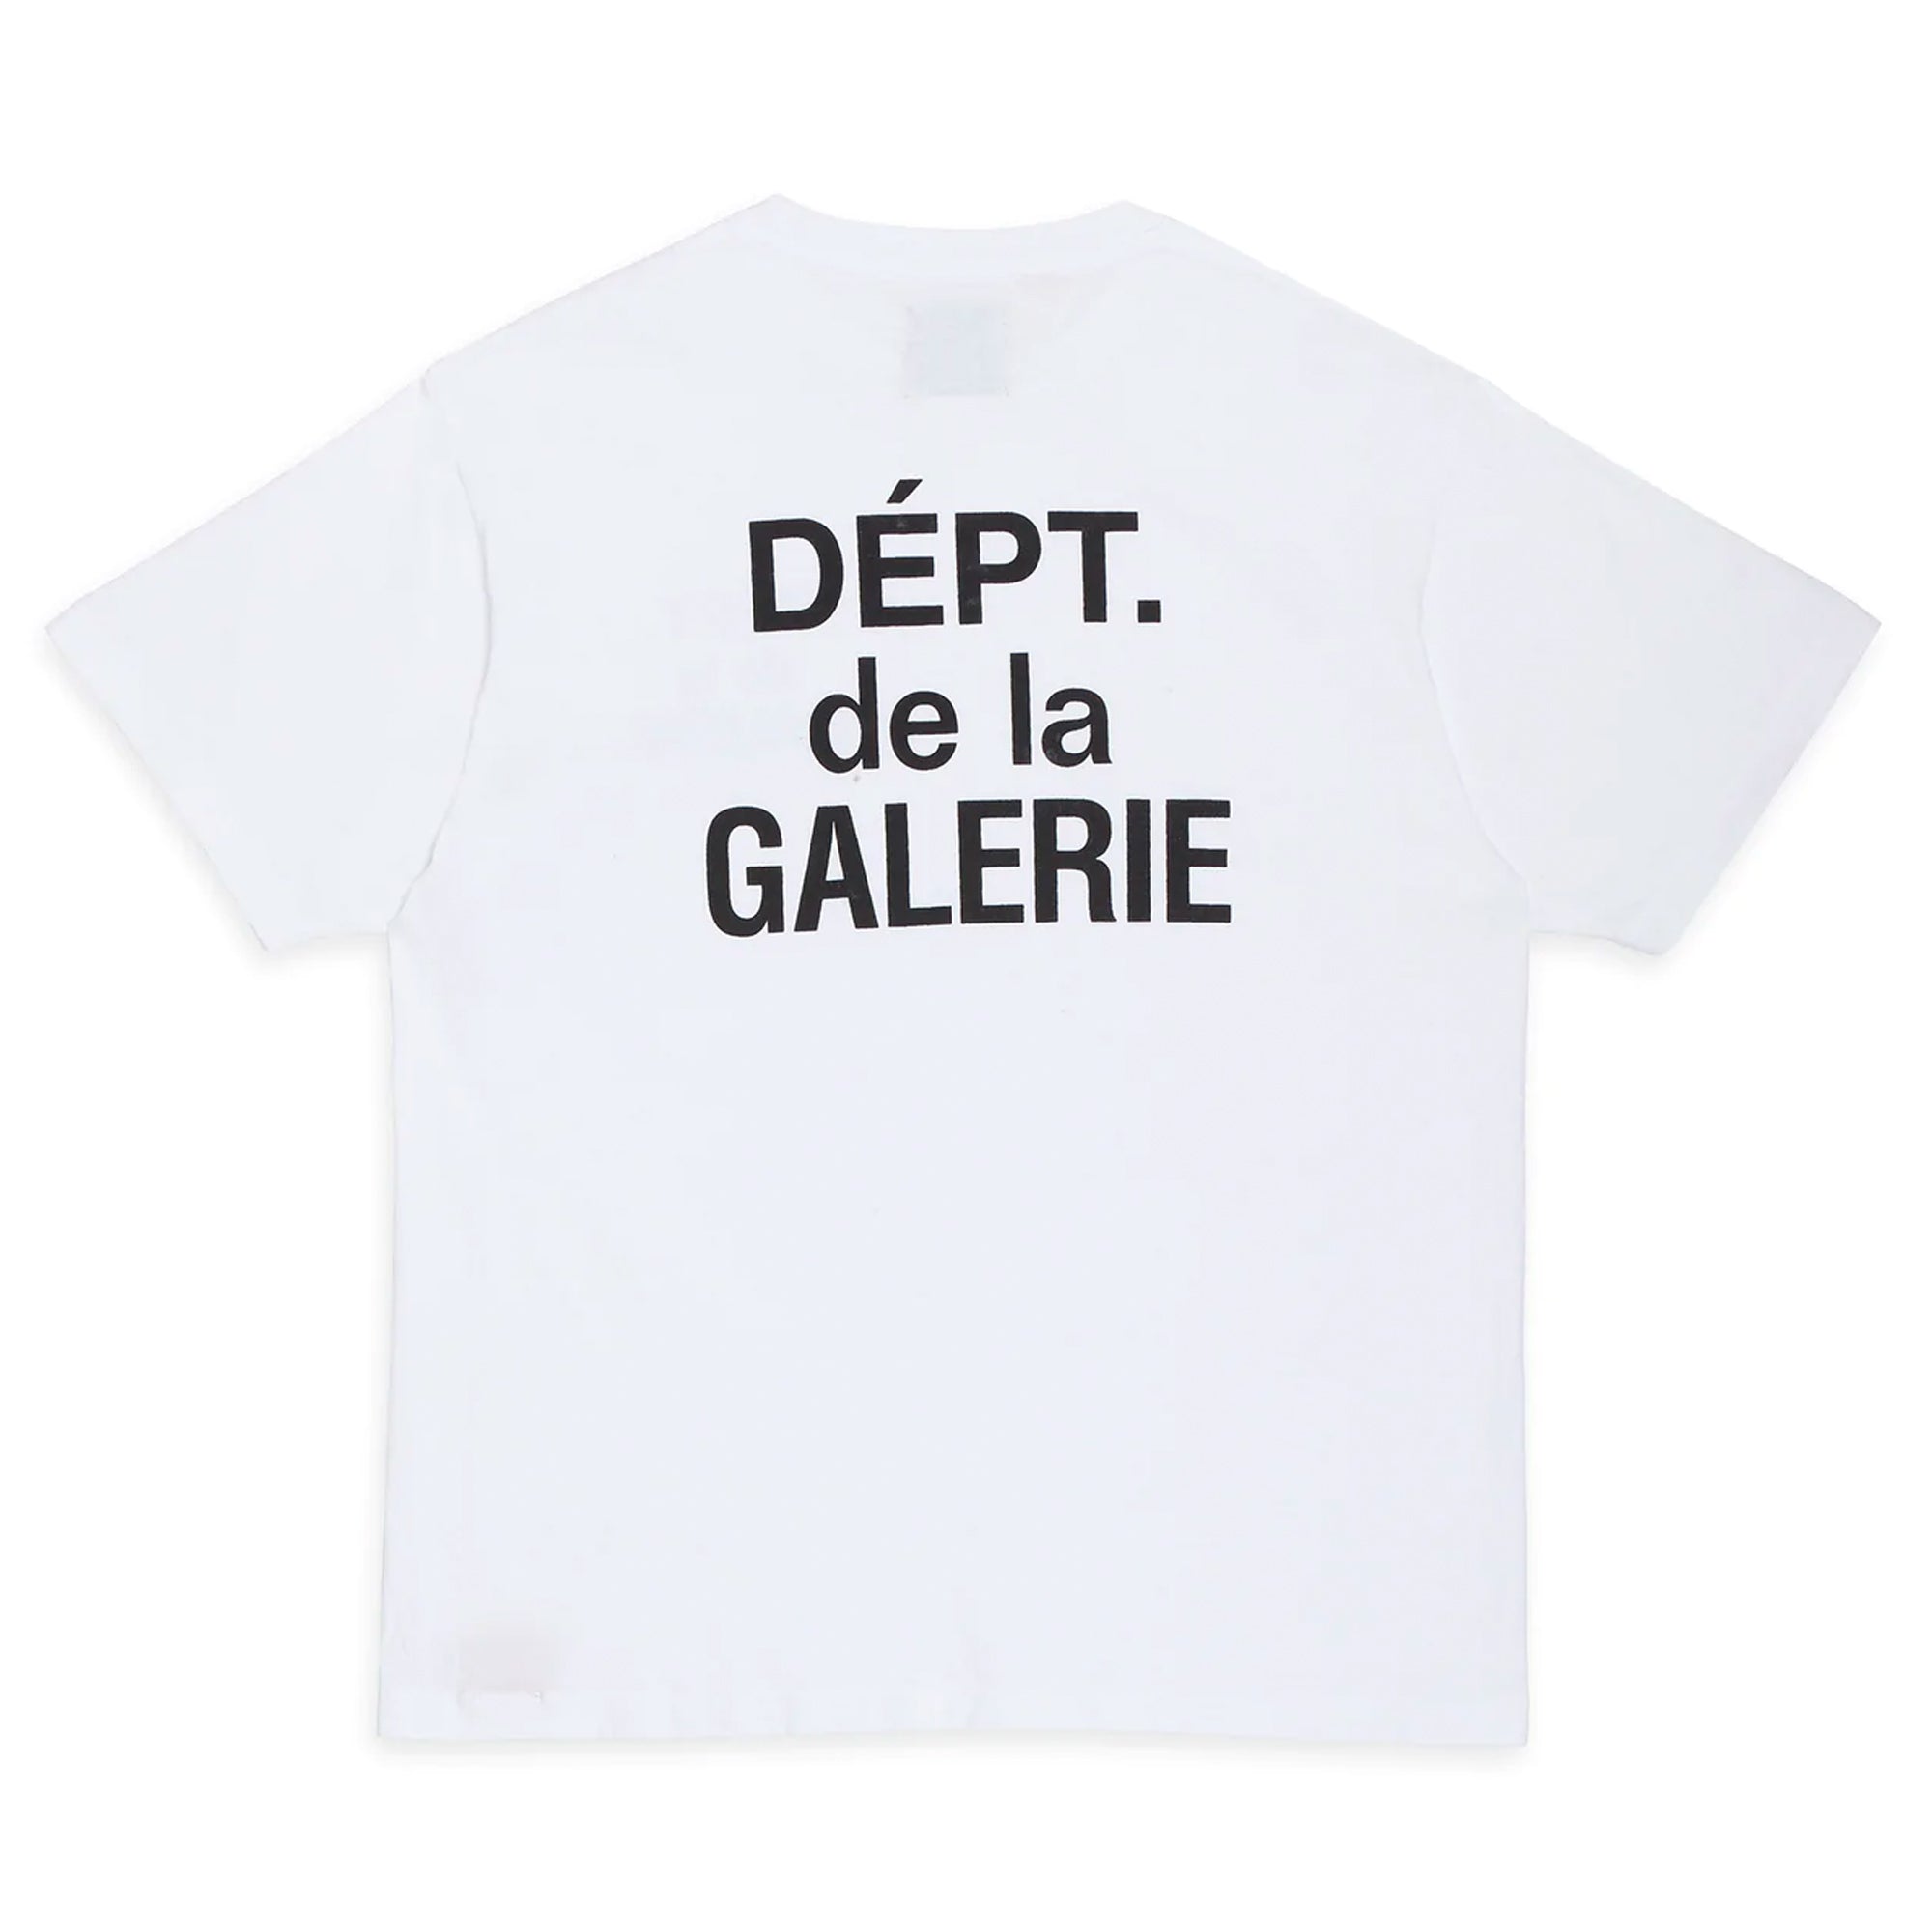 Gallery Dept. French Tee White-PLUS